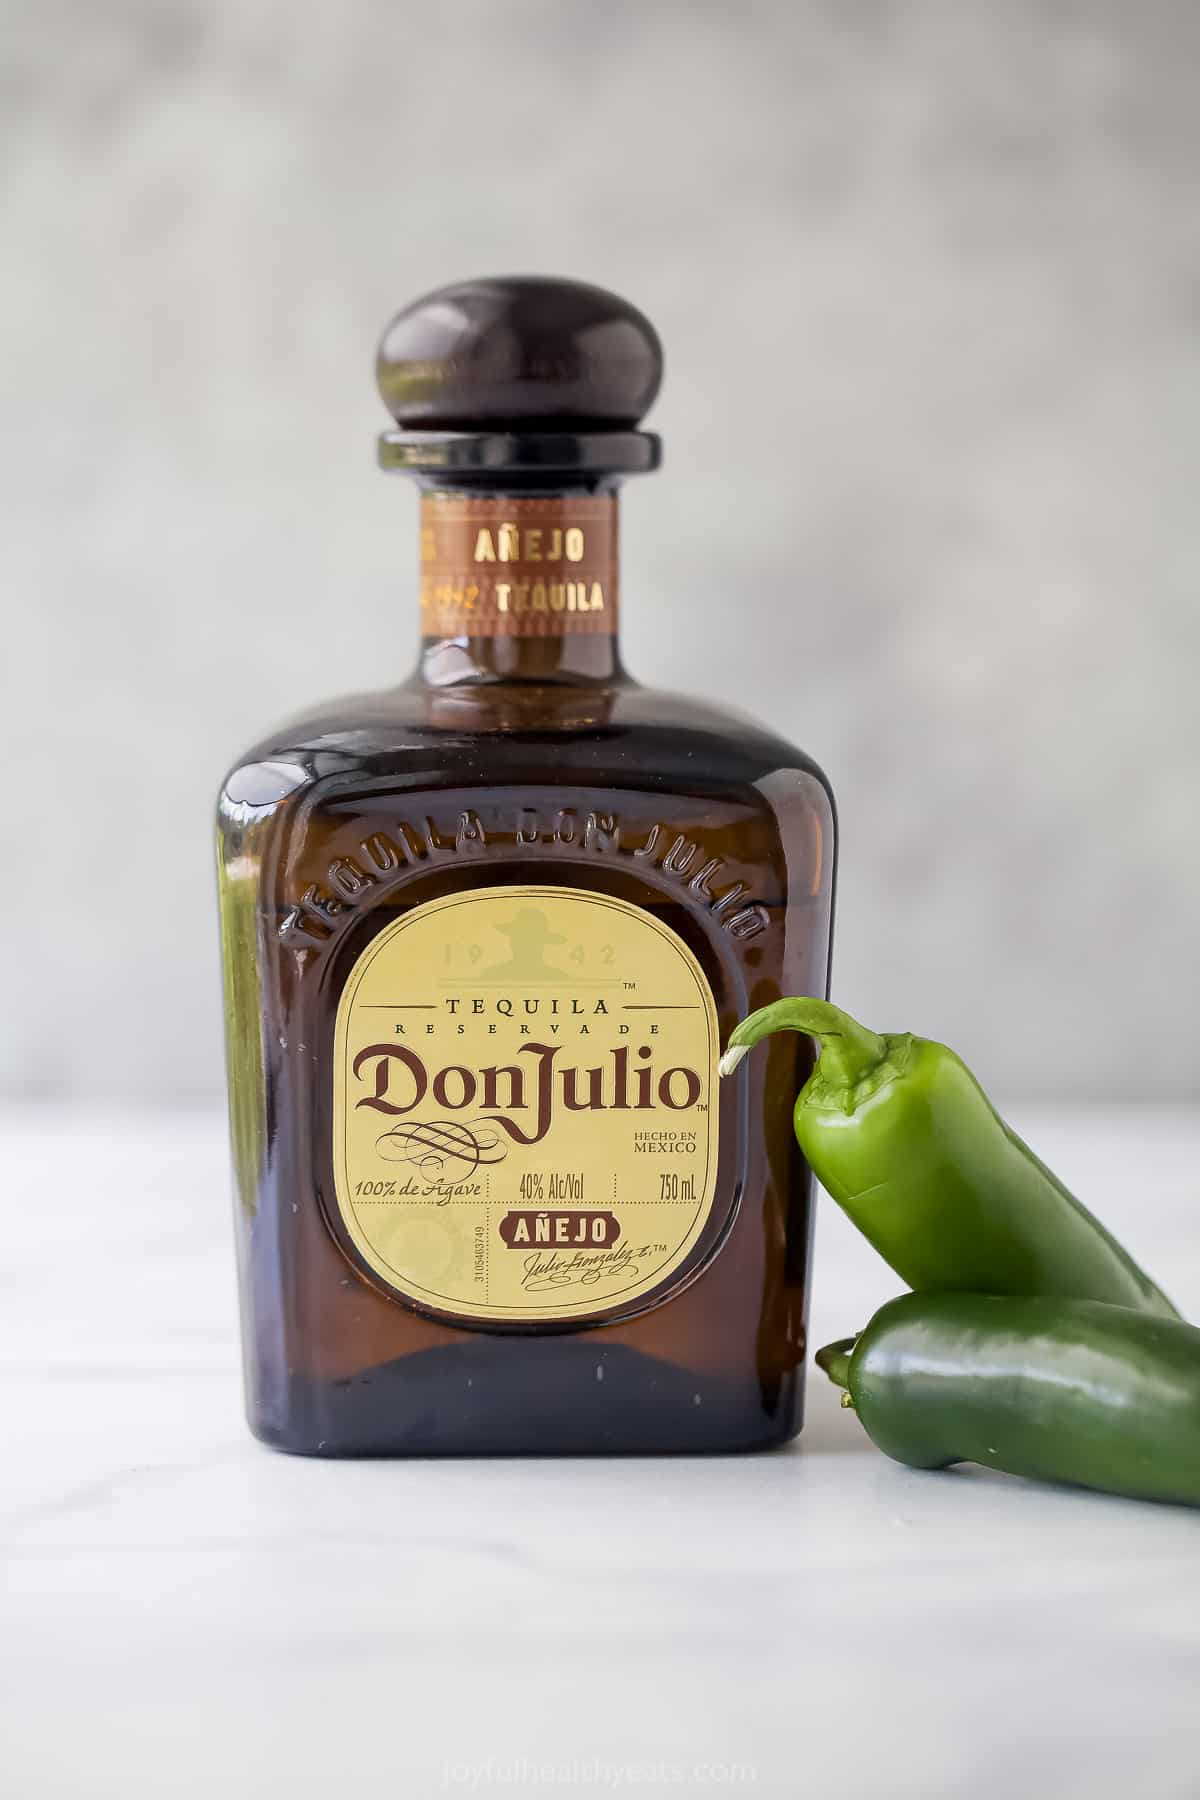 A bottle of Don Julio tequila on a kitchen countertop beside two fresh jalapeños